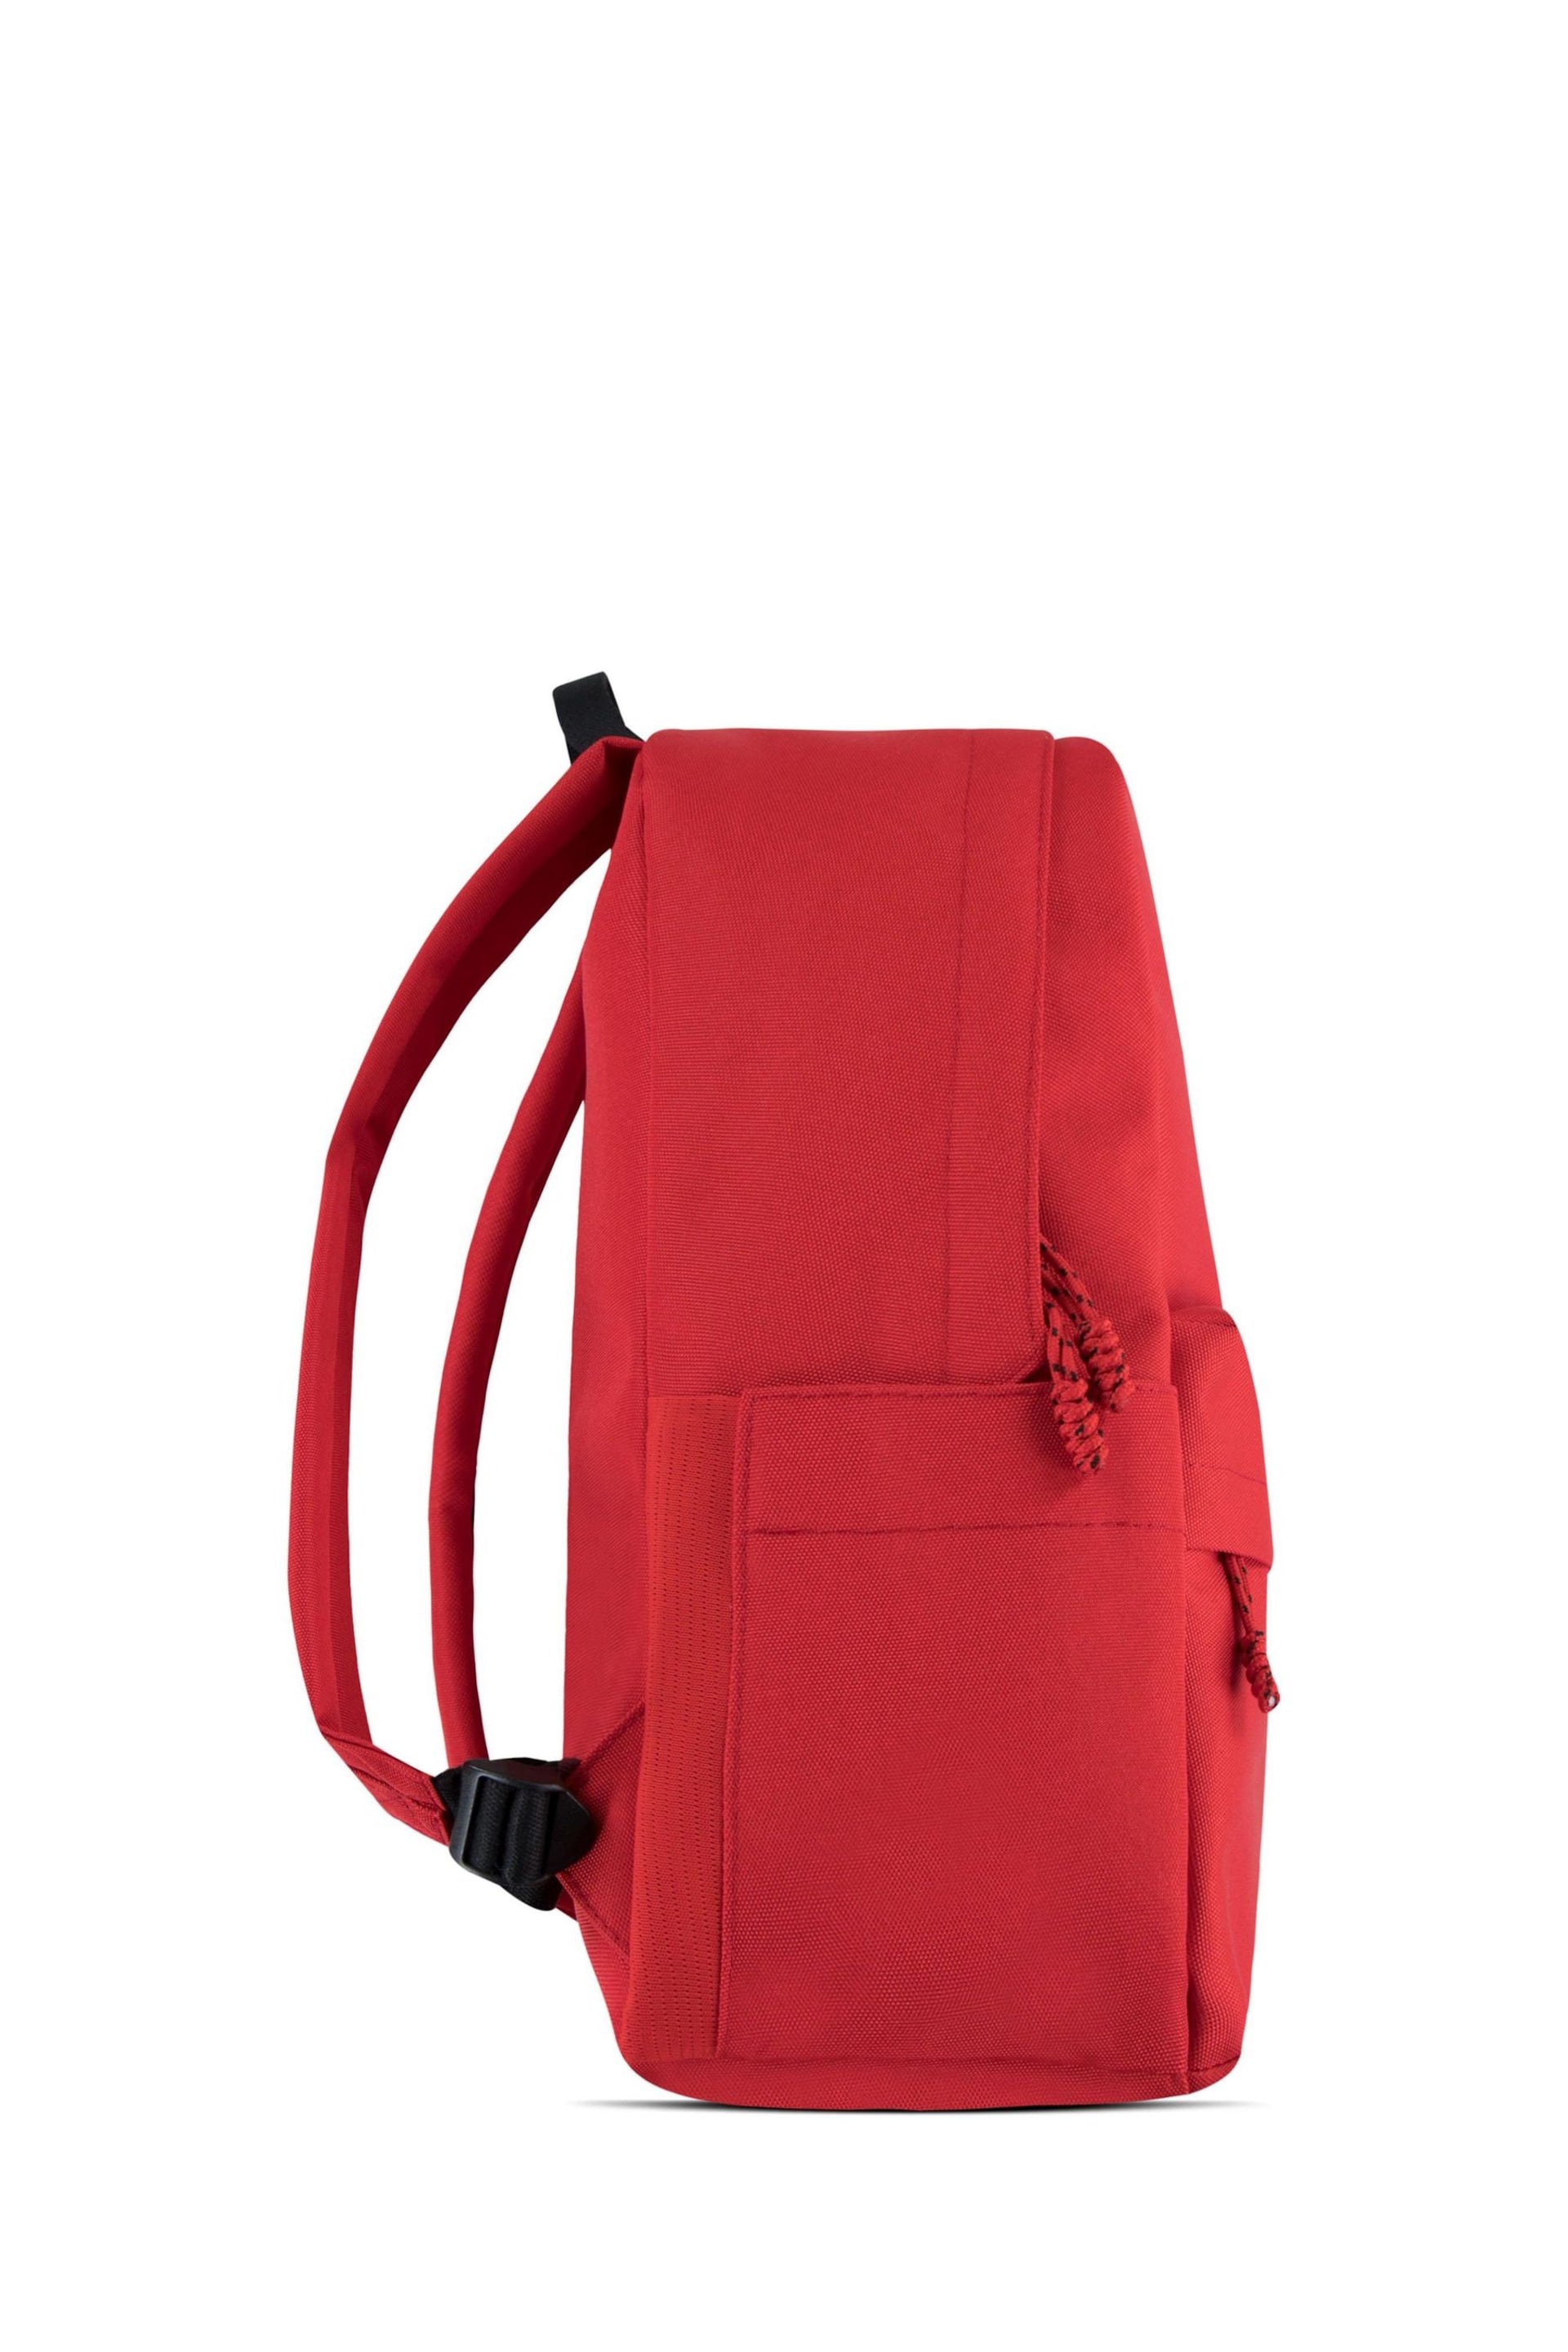 Converse Red Kids Backpack - Image 7 of 10